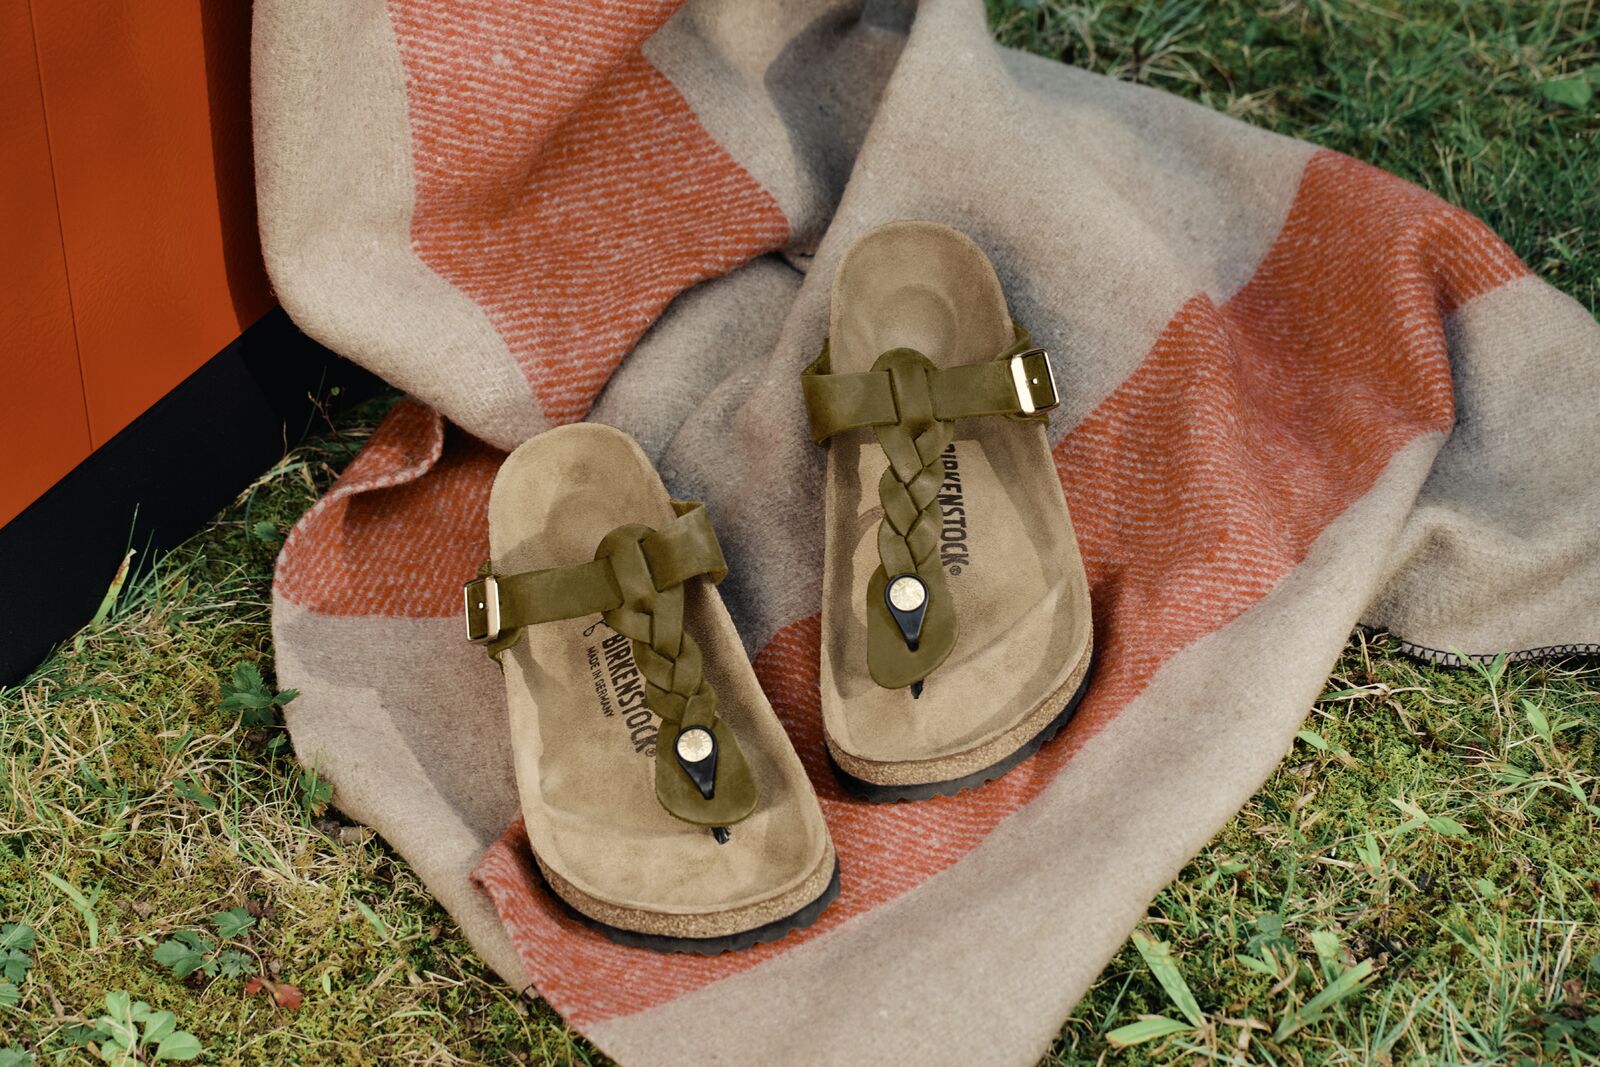 BIRKENSTOCK GIZEH BRAIDED LEATHER | OLIVE GREEN